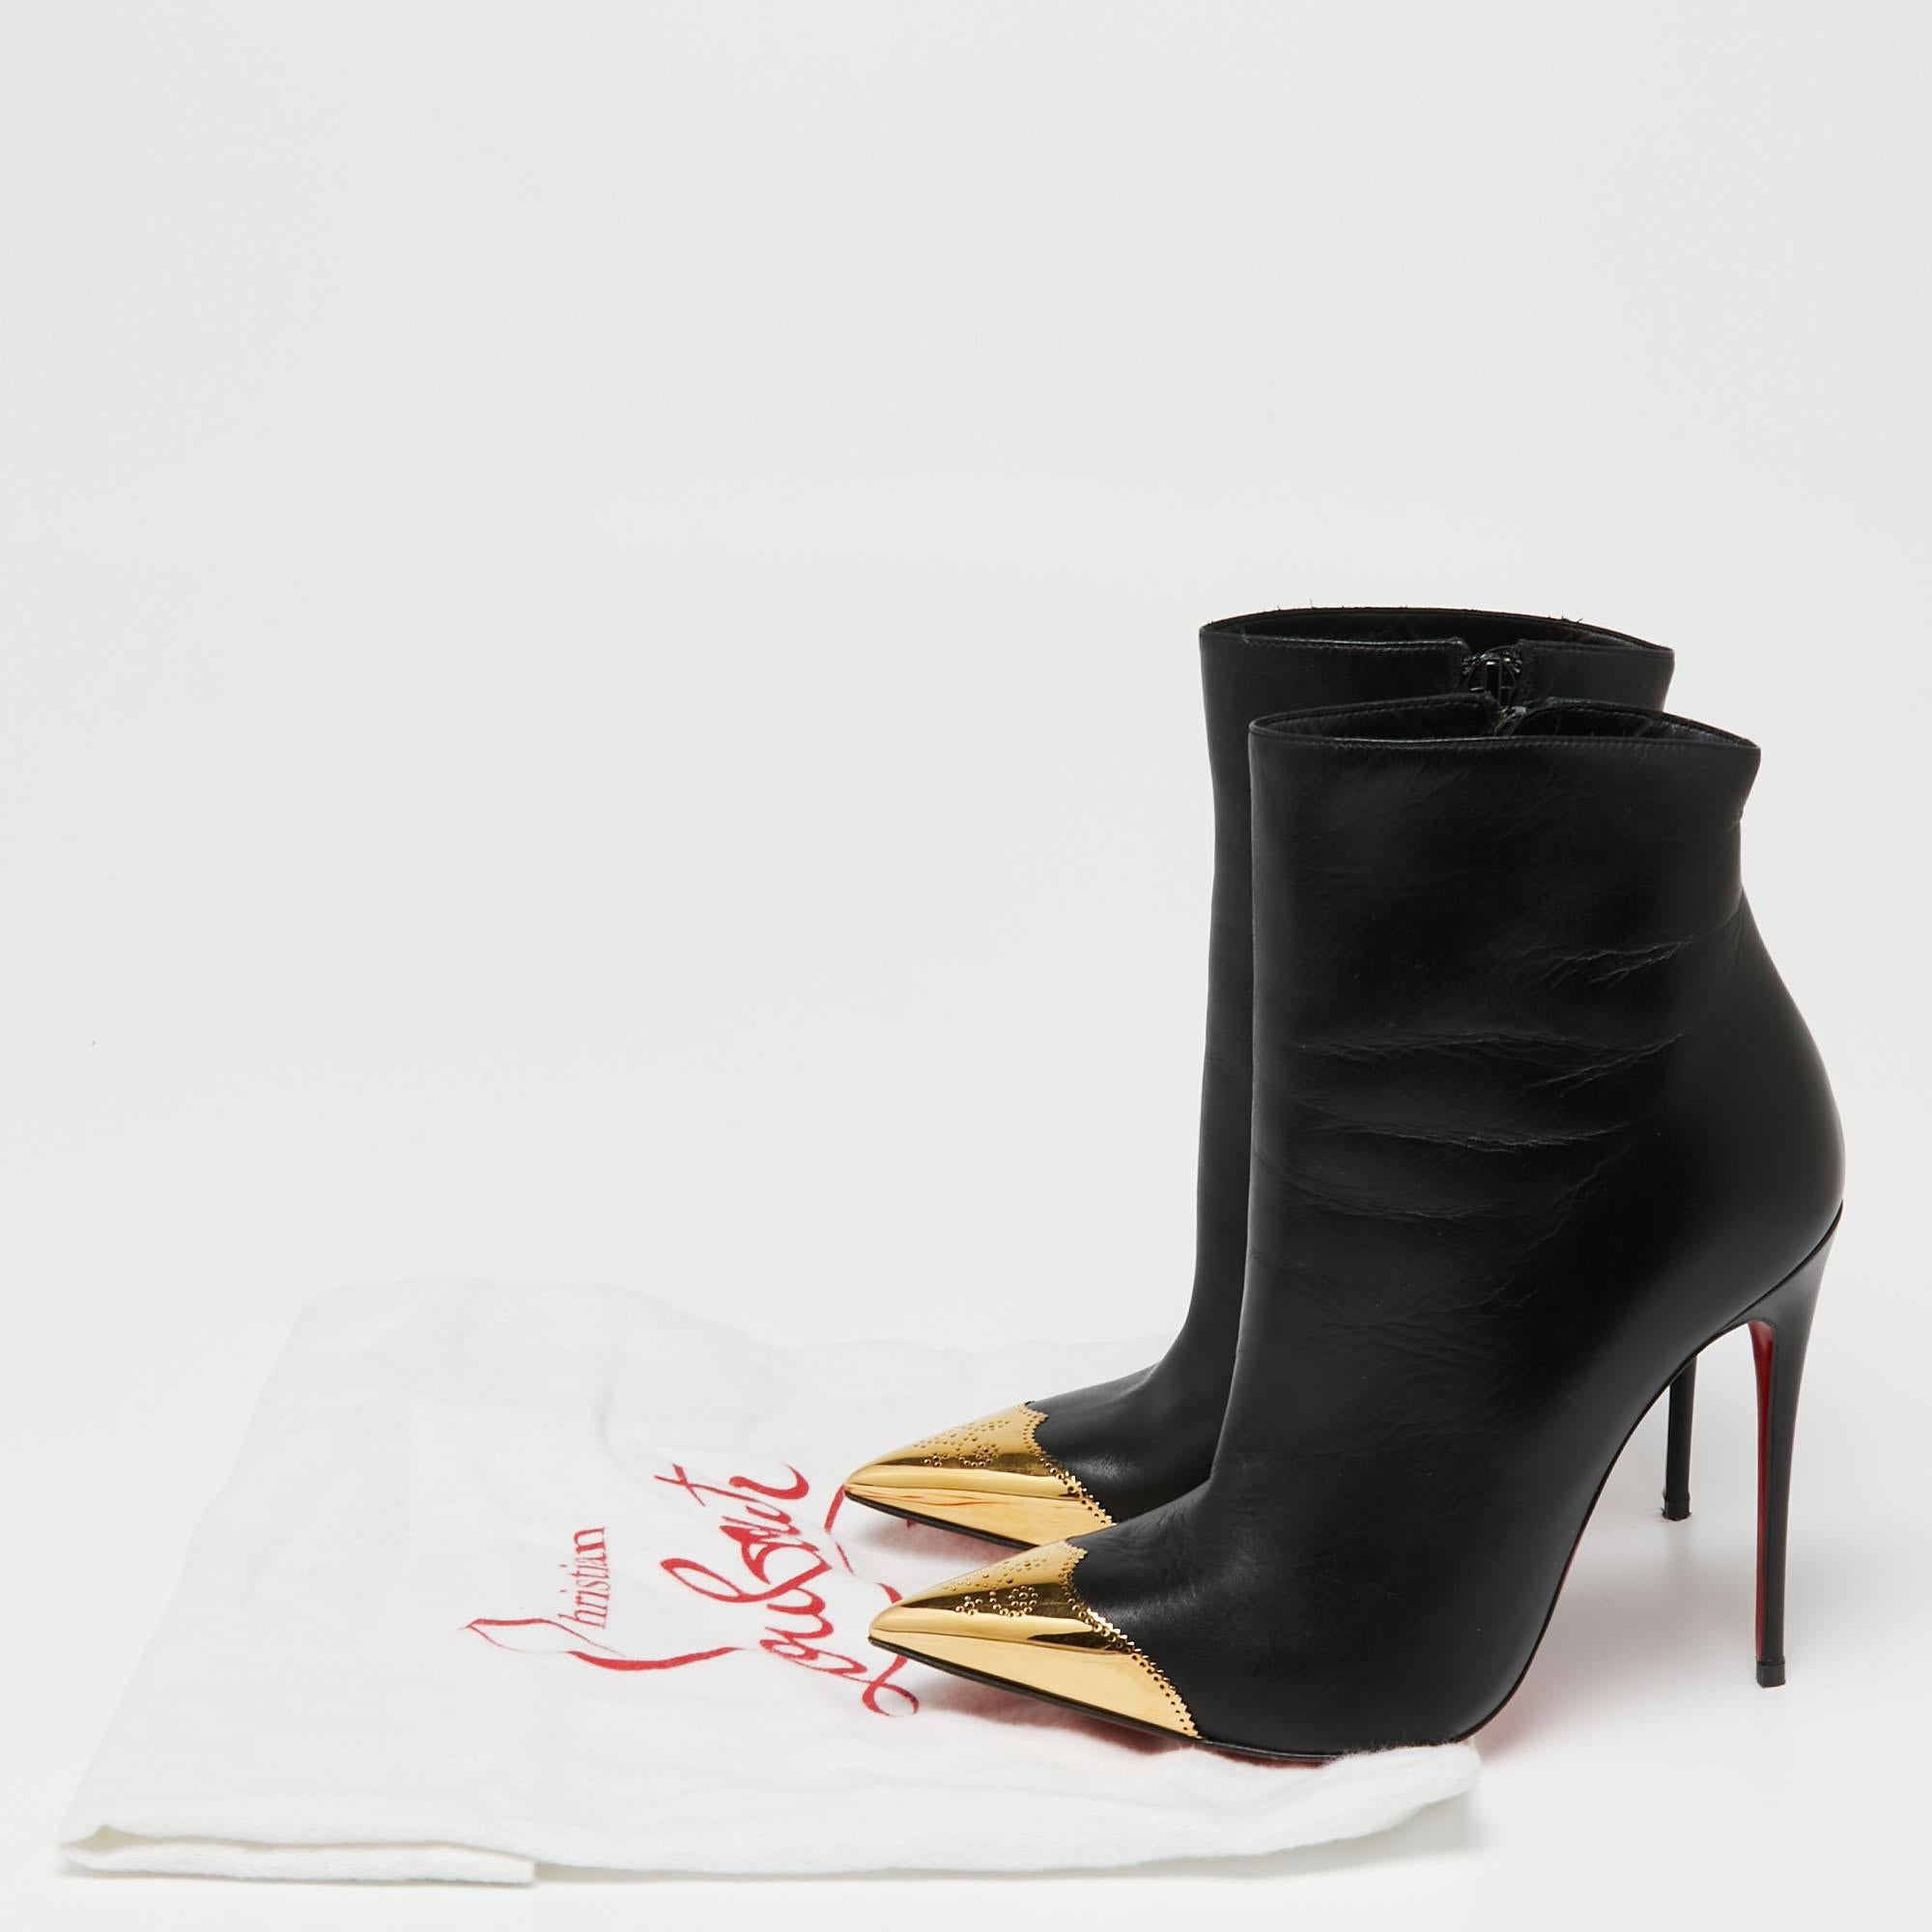 Christian Louboutin Black Leather Calamijane Pointed-Toe Ankle Booties Size 35.5 For Sale 5